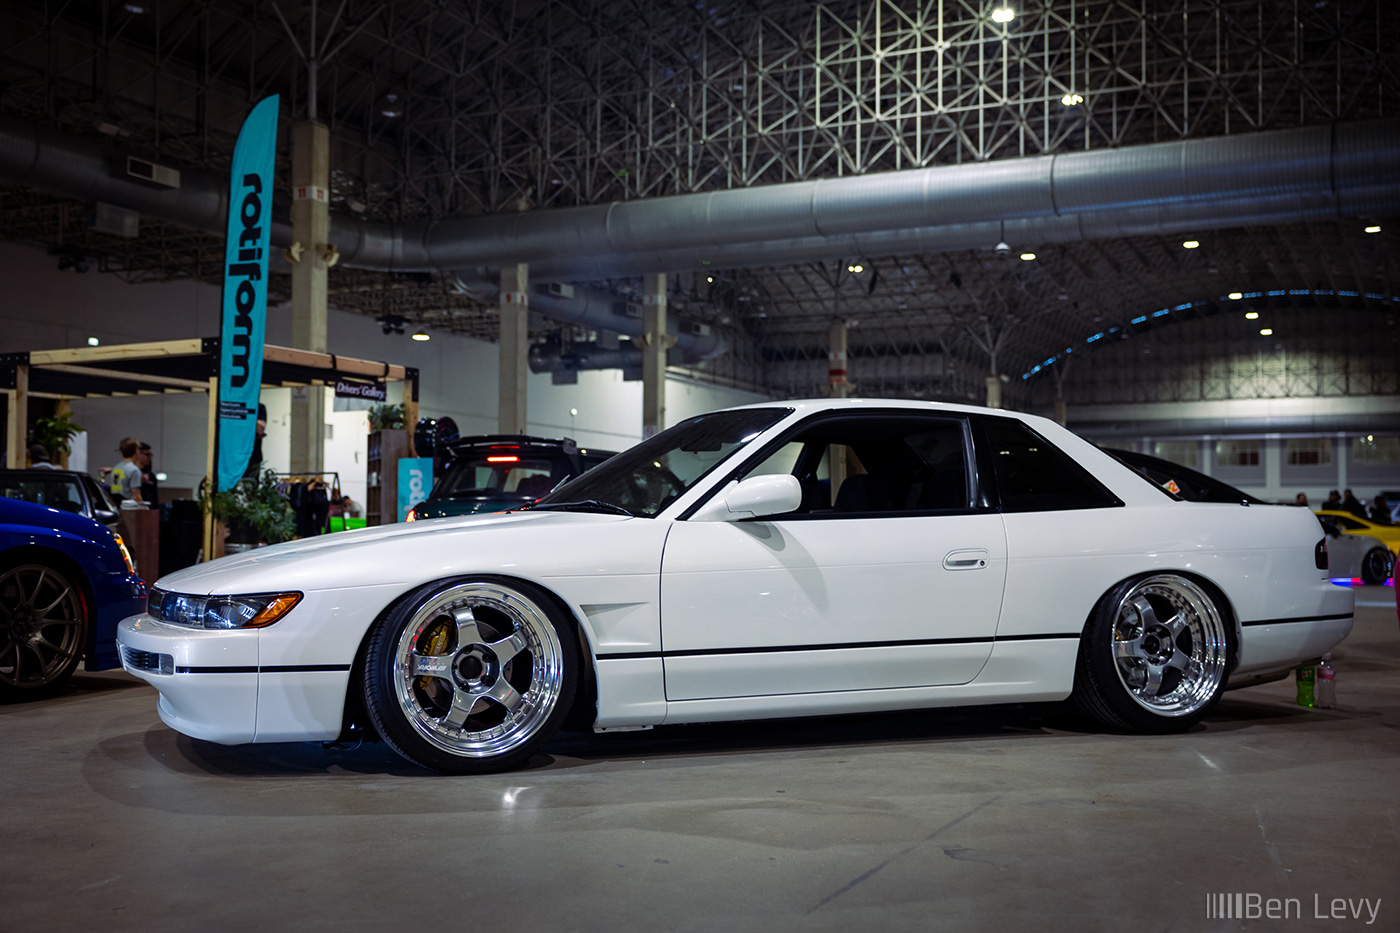 White S13 Nissan 240SX Coupe at Wekfest Chicago